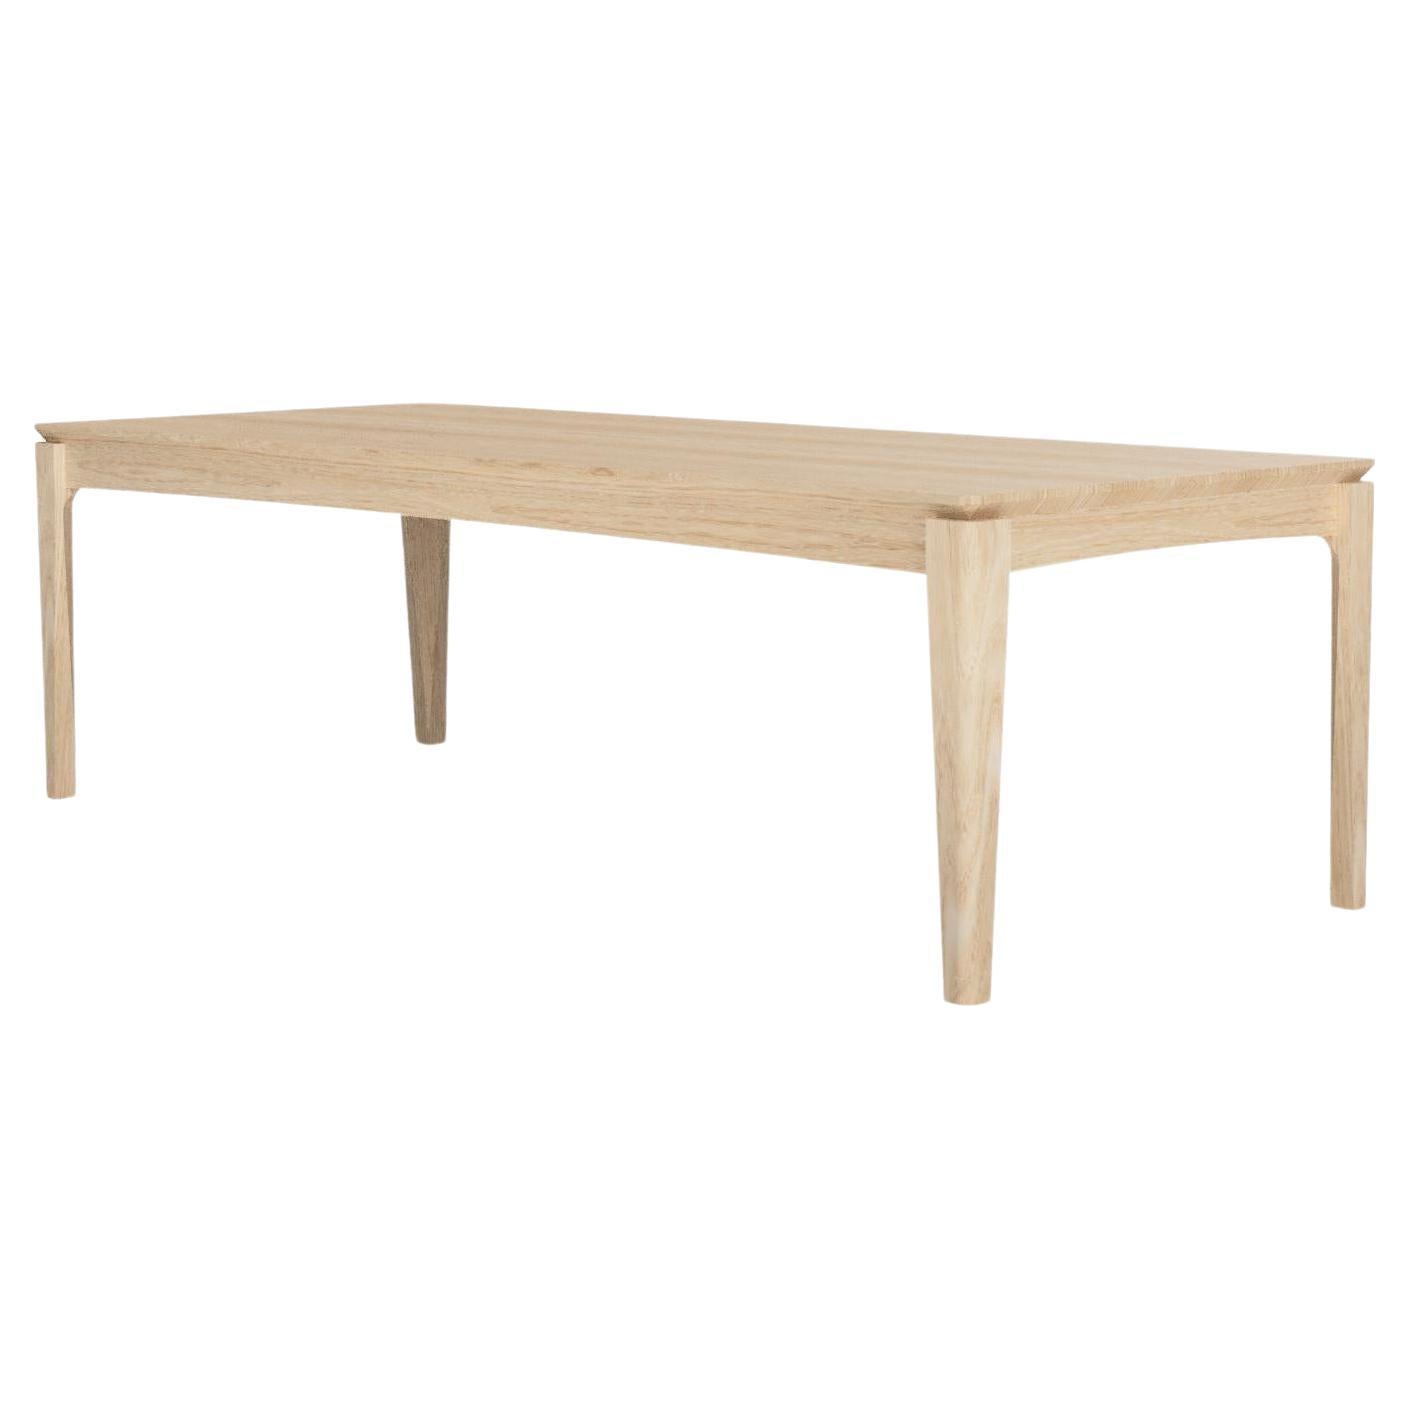 Modern White Oak Loki Dining Table from the Signature Series by Pompous Fox